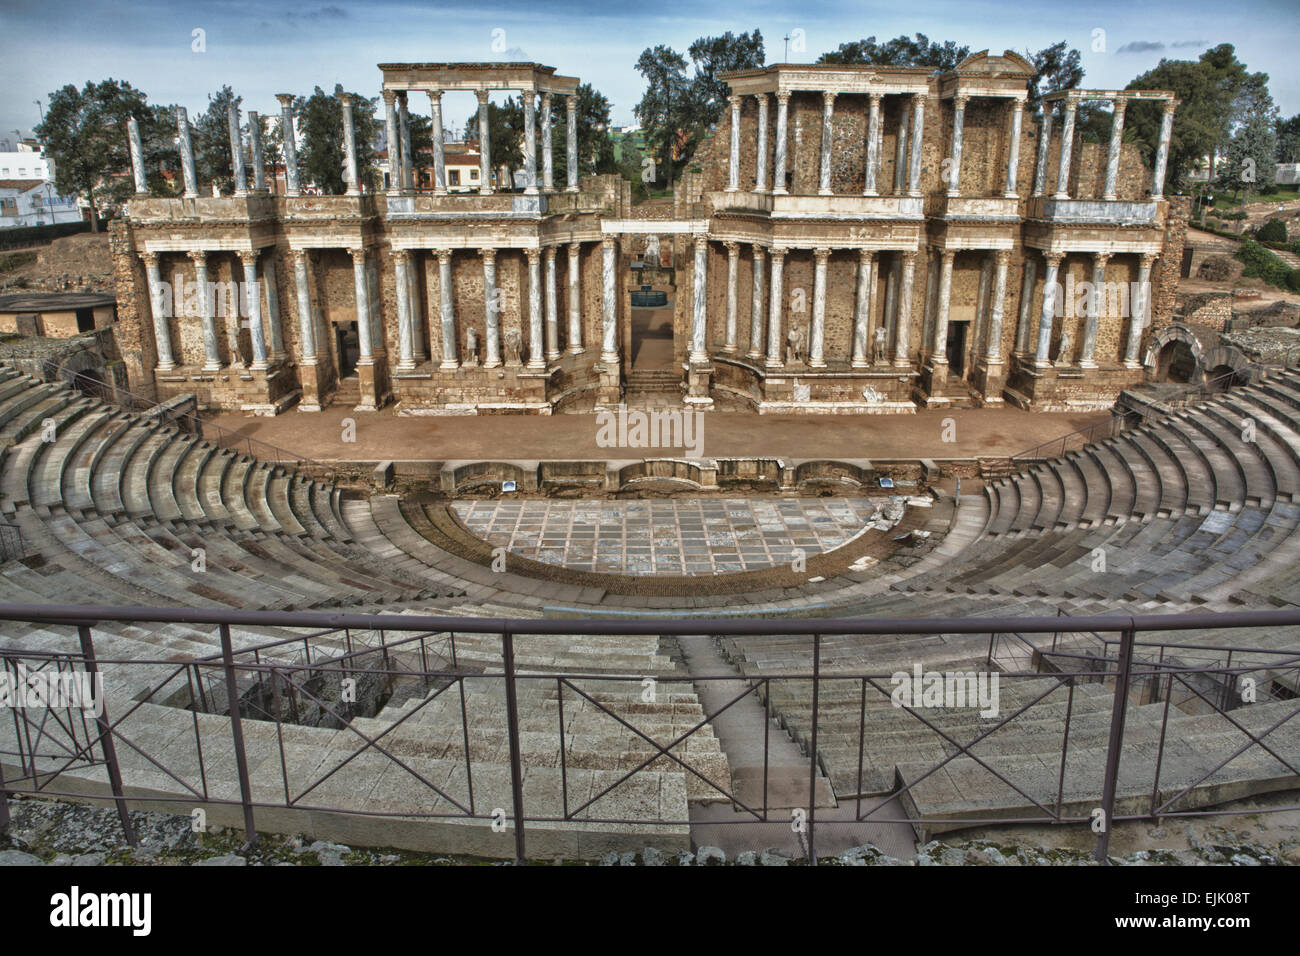 Roman theatre, located in the archaeological ensemble of Mérida, one of the largest and most extensive archaeological sites in S Stock Photo